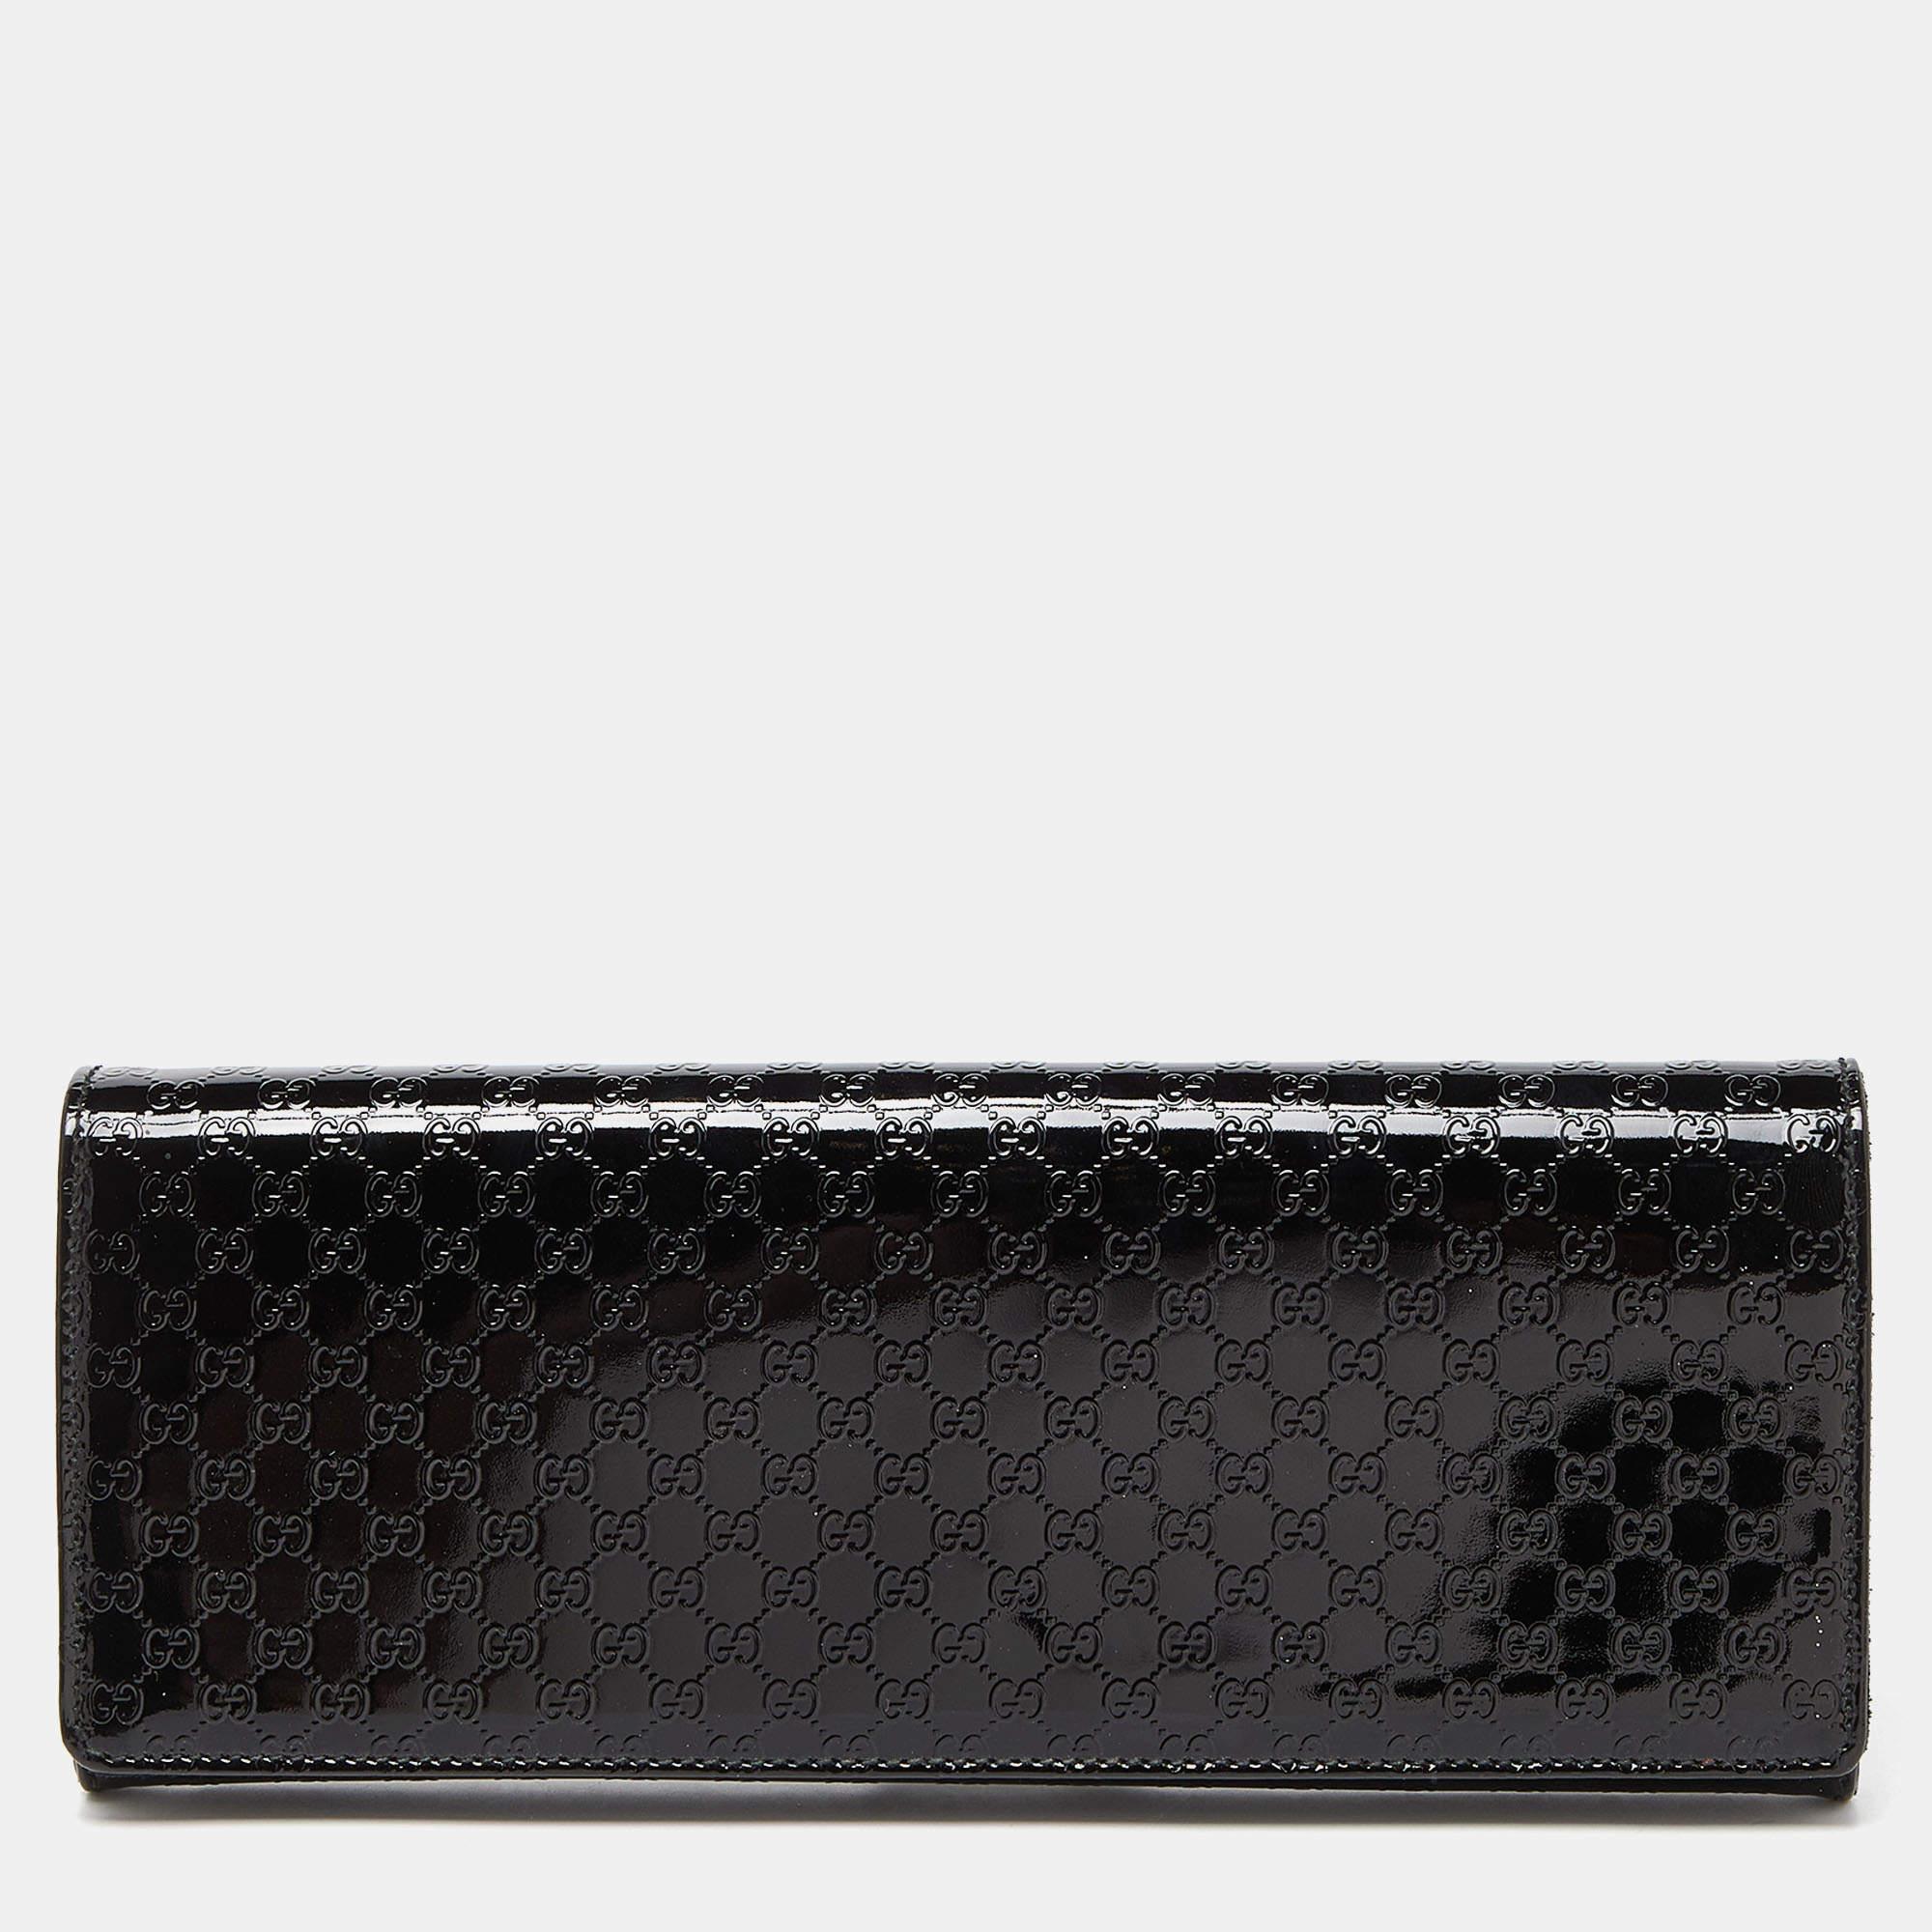 Crafted from quality materials, your wardrobe is missing out on this beautifully made designer clutch. Look your fashionable best in any outfit with this stylish clutch that promises to elevate your ensemble.

Includes: Original Dustbag

